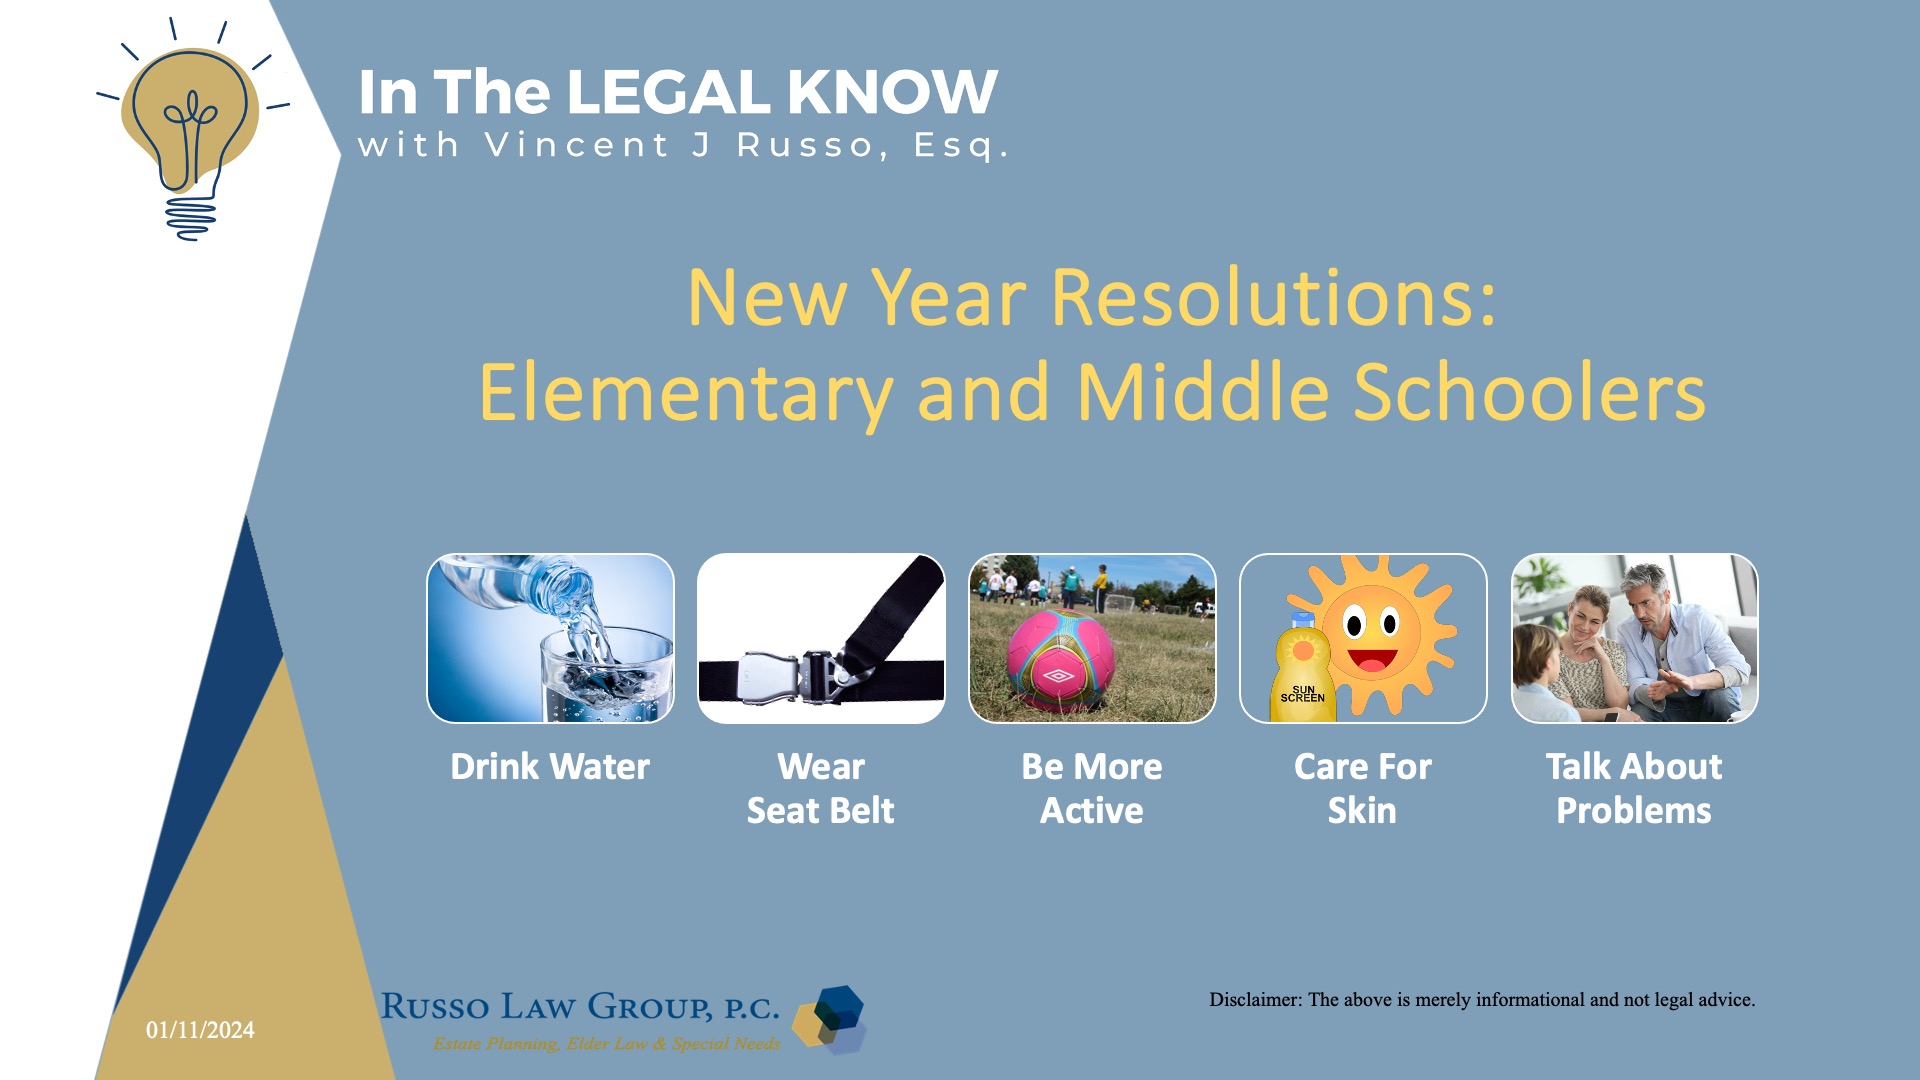 New Years Resolutions for Elementary and Middle Schoolers